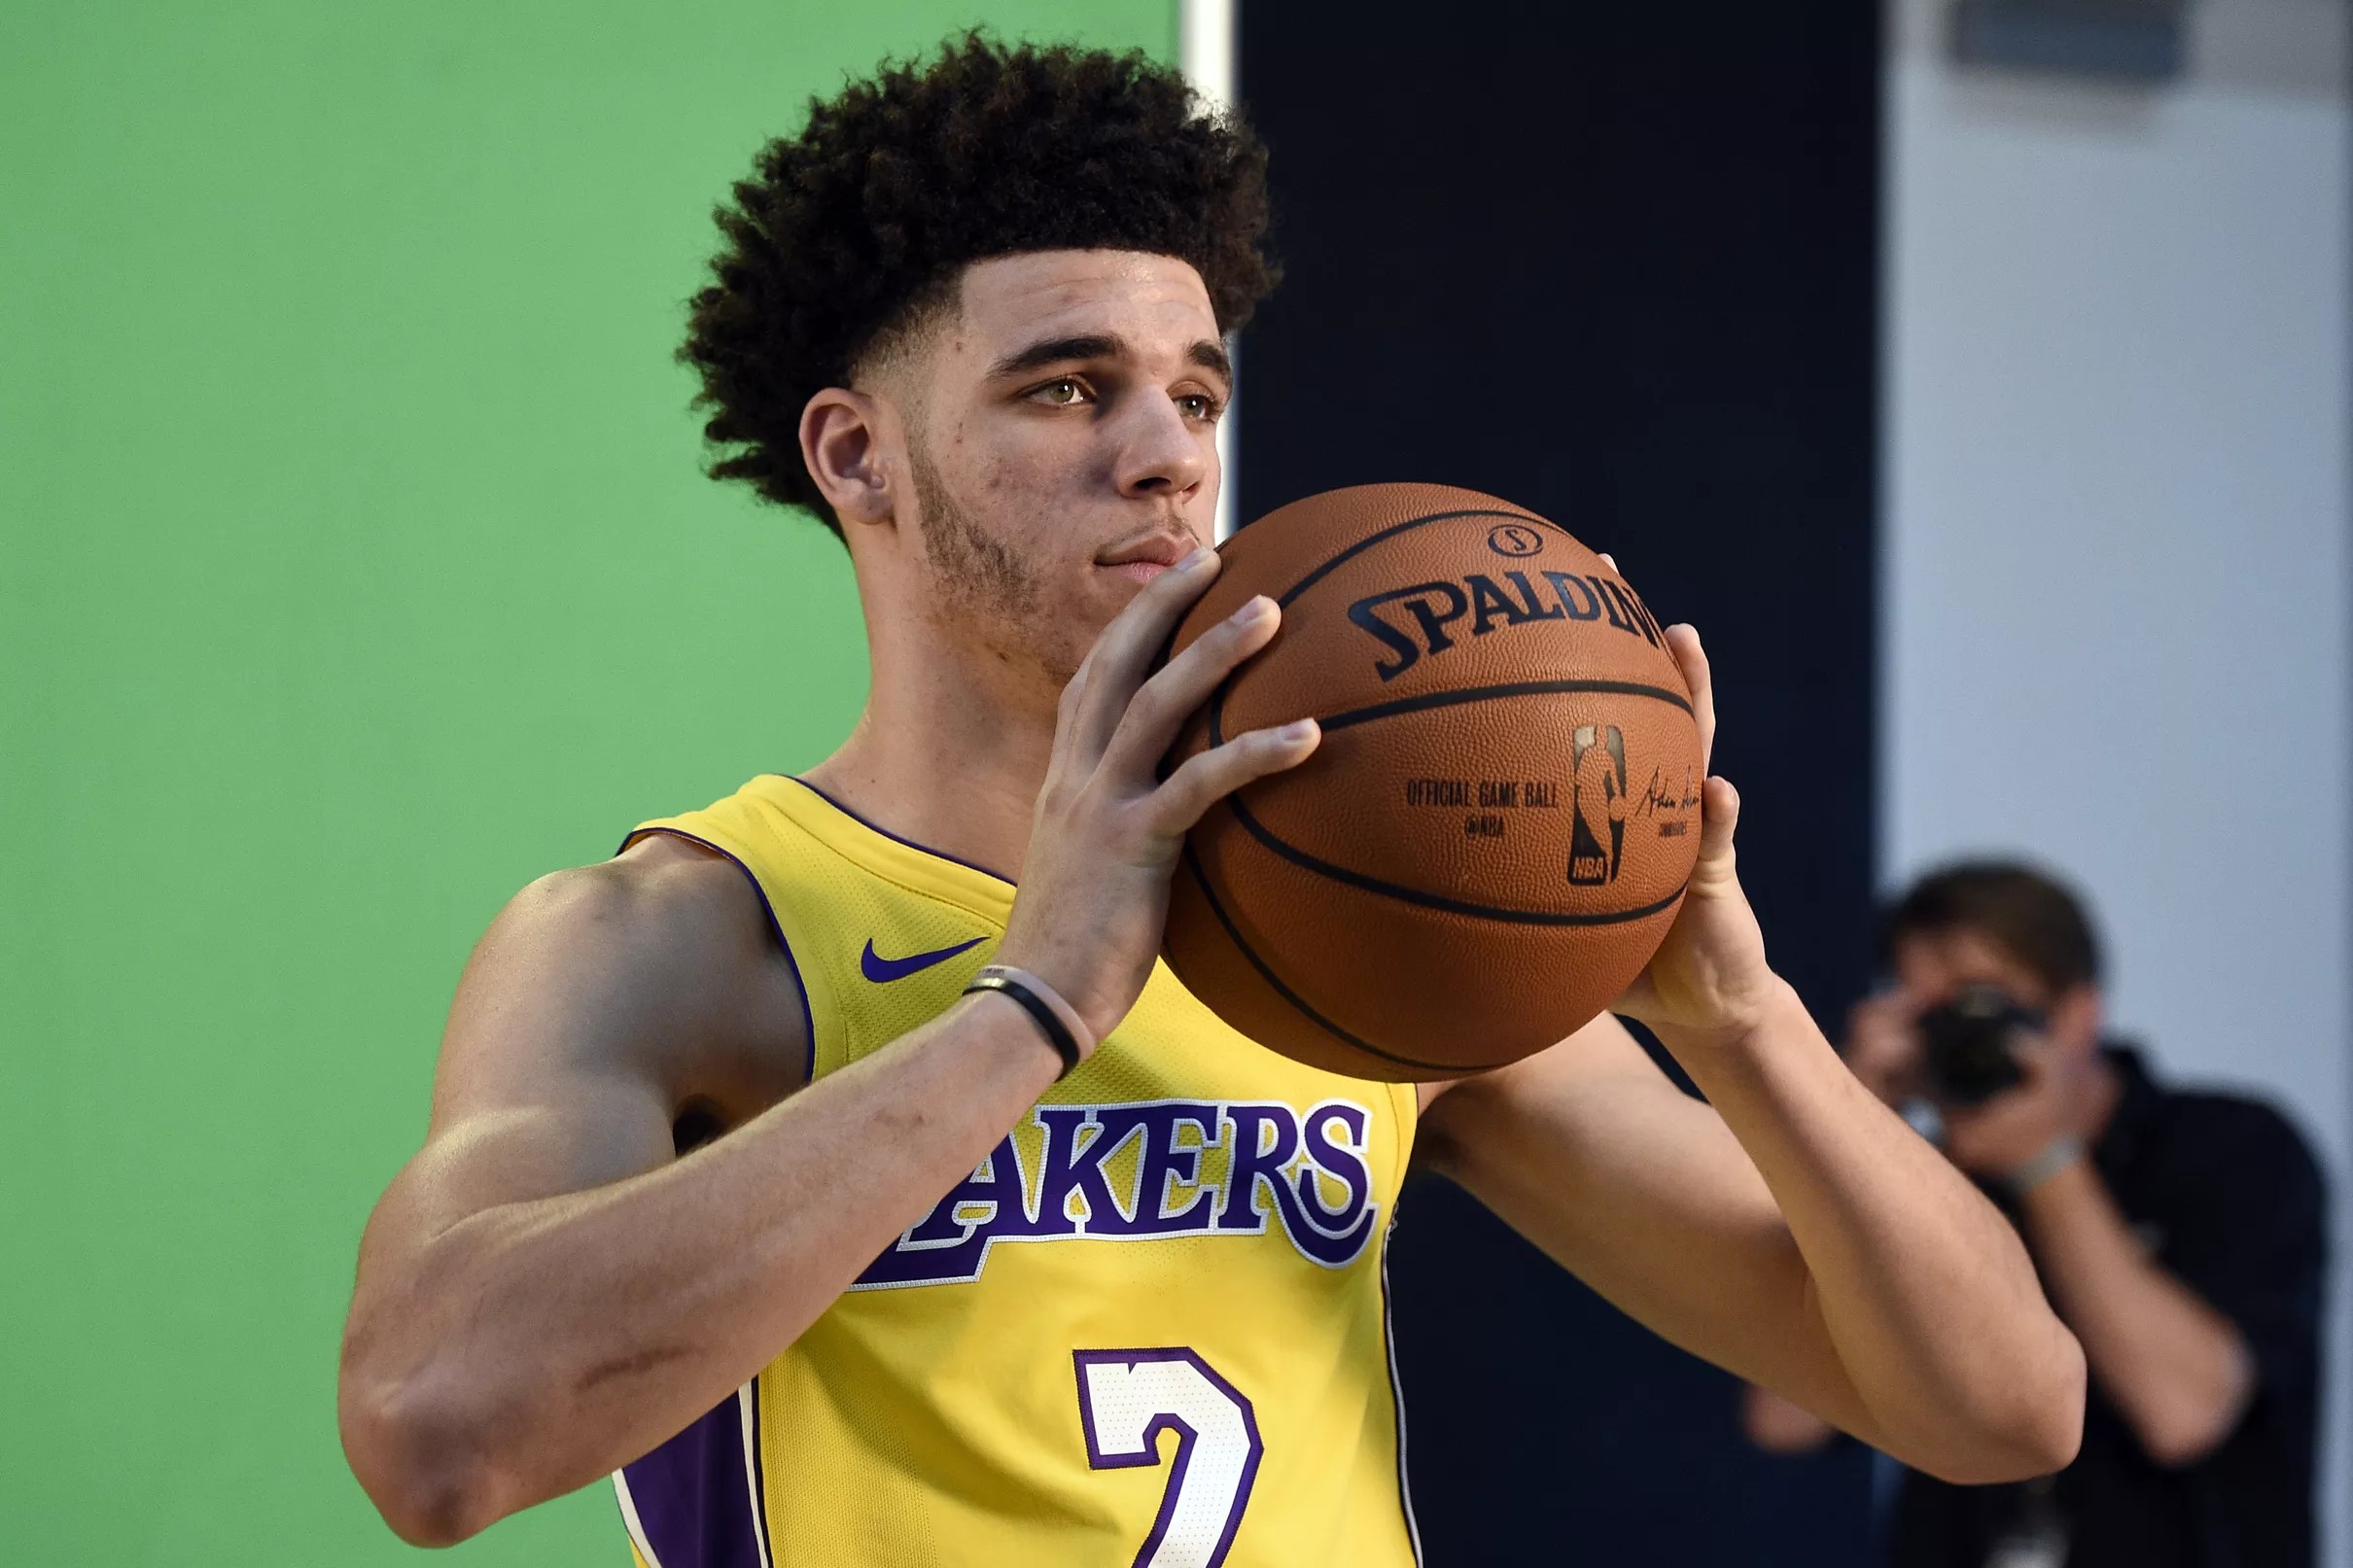 Lakers Training Camp: Scrimmage highlights featuring Lonzo Ball, Kyle Kuzma...